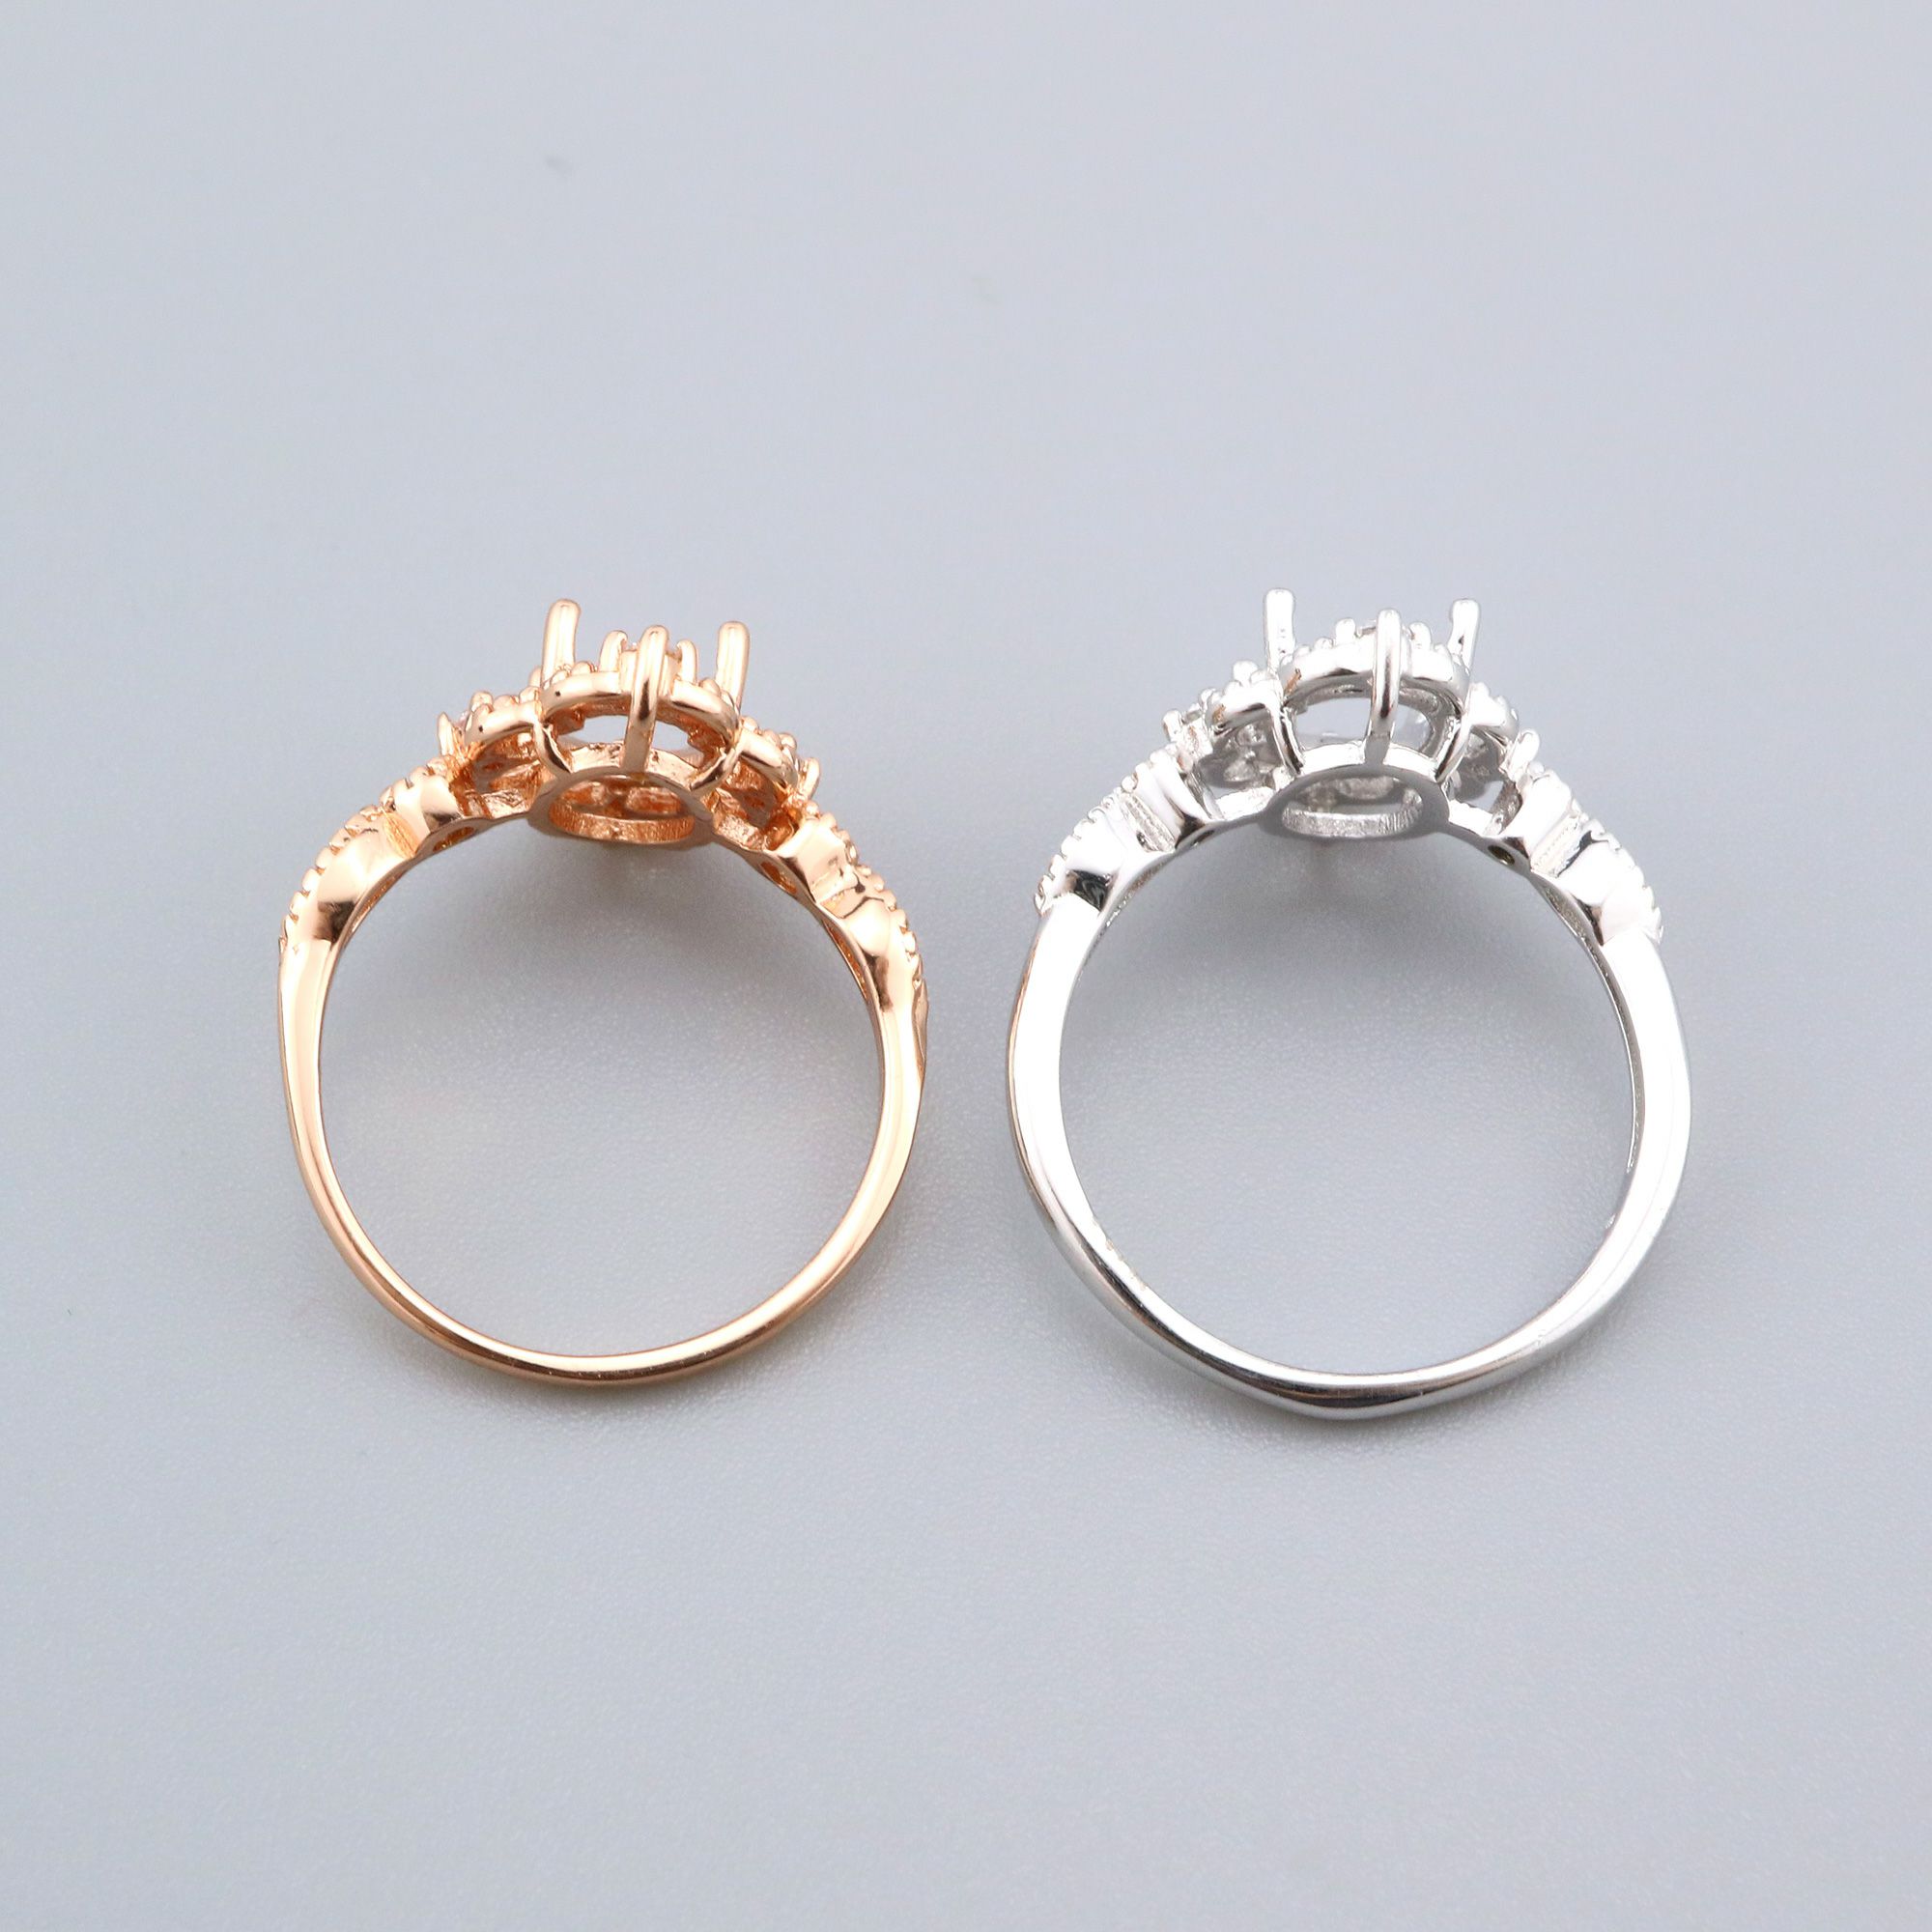 6x8MM Oval Prong Ring Settings Solid 925 Sterling Silver Rose Gold Plated Vintage Style Lace Set Size DIY Ring Bezel for Gemstone Supplies 1224084 - Click Image to Close